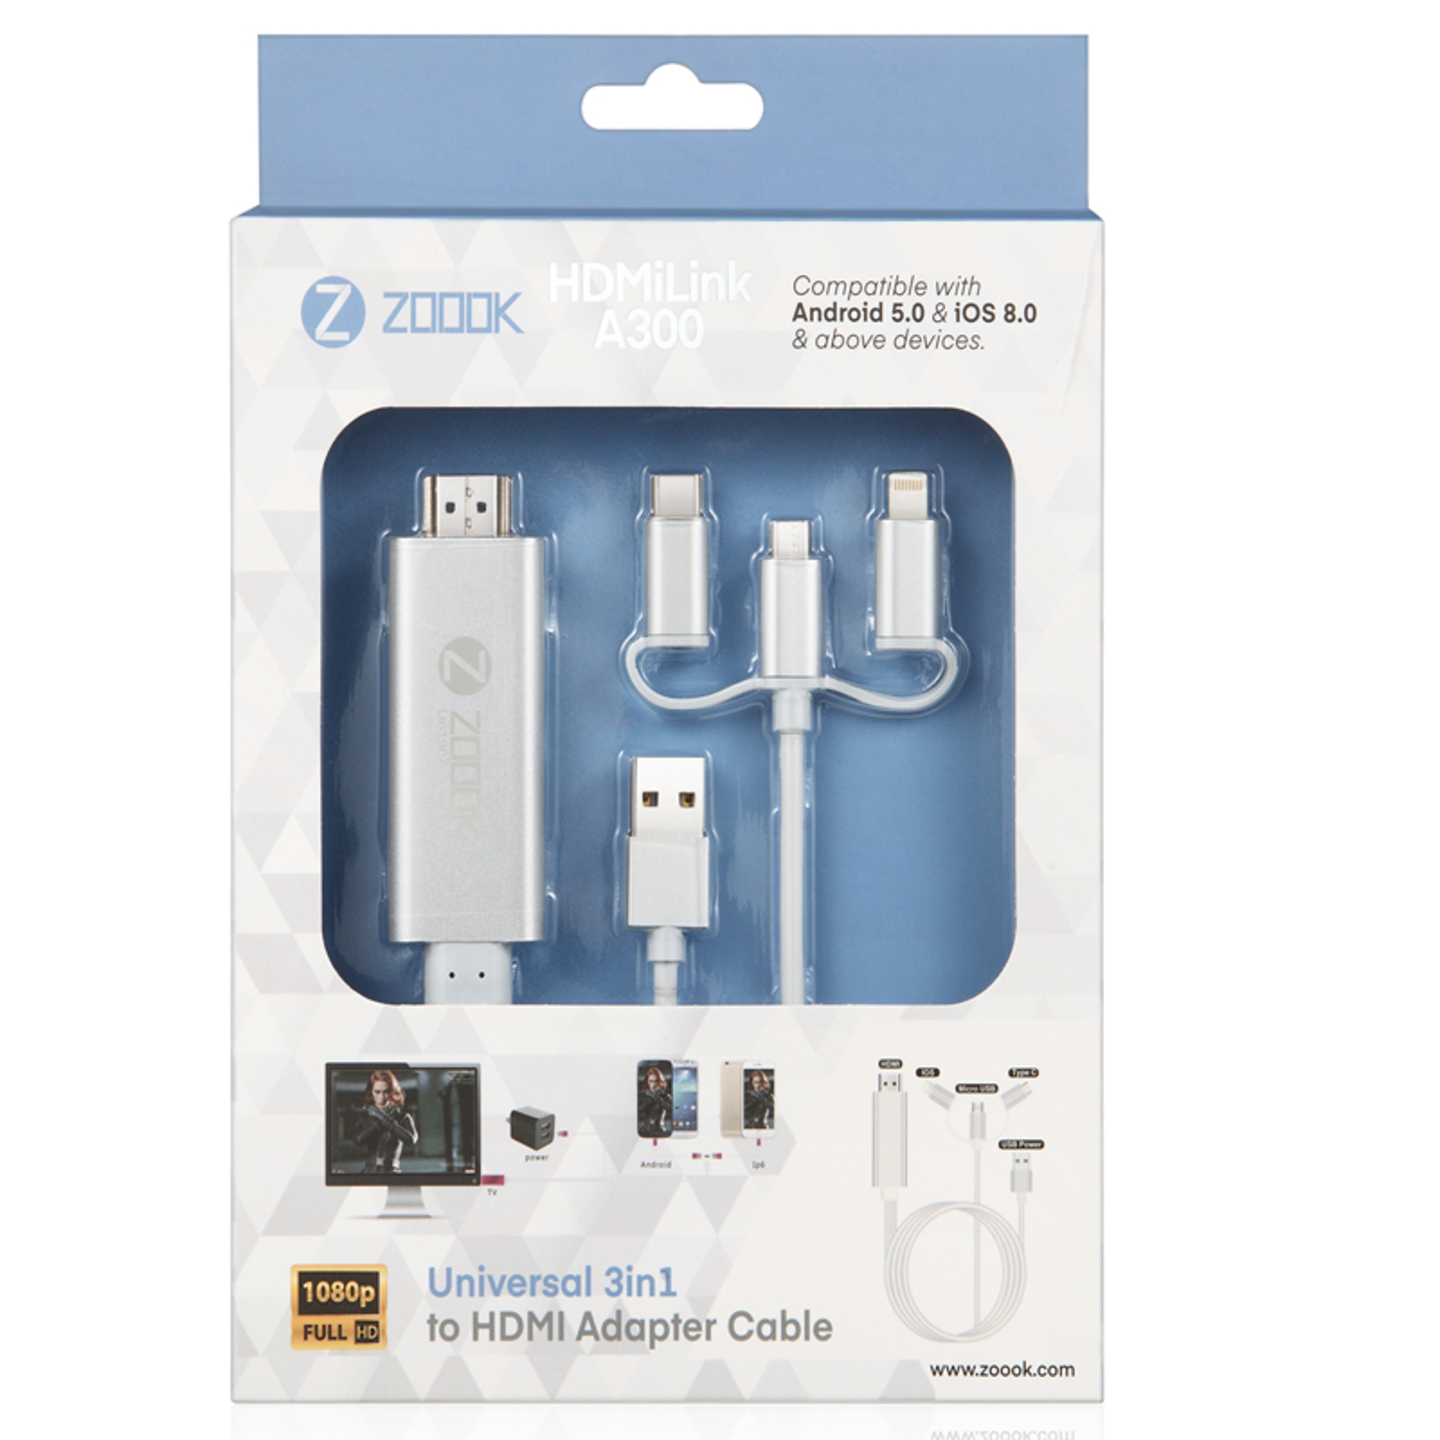 Zook HDMiLink A300 Universal 3 in1 to HDMI Adapter Cable